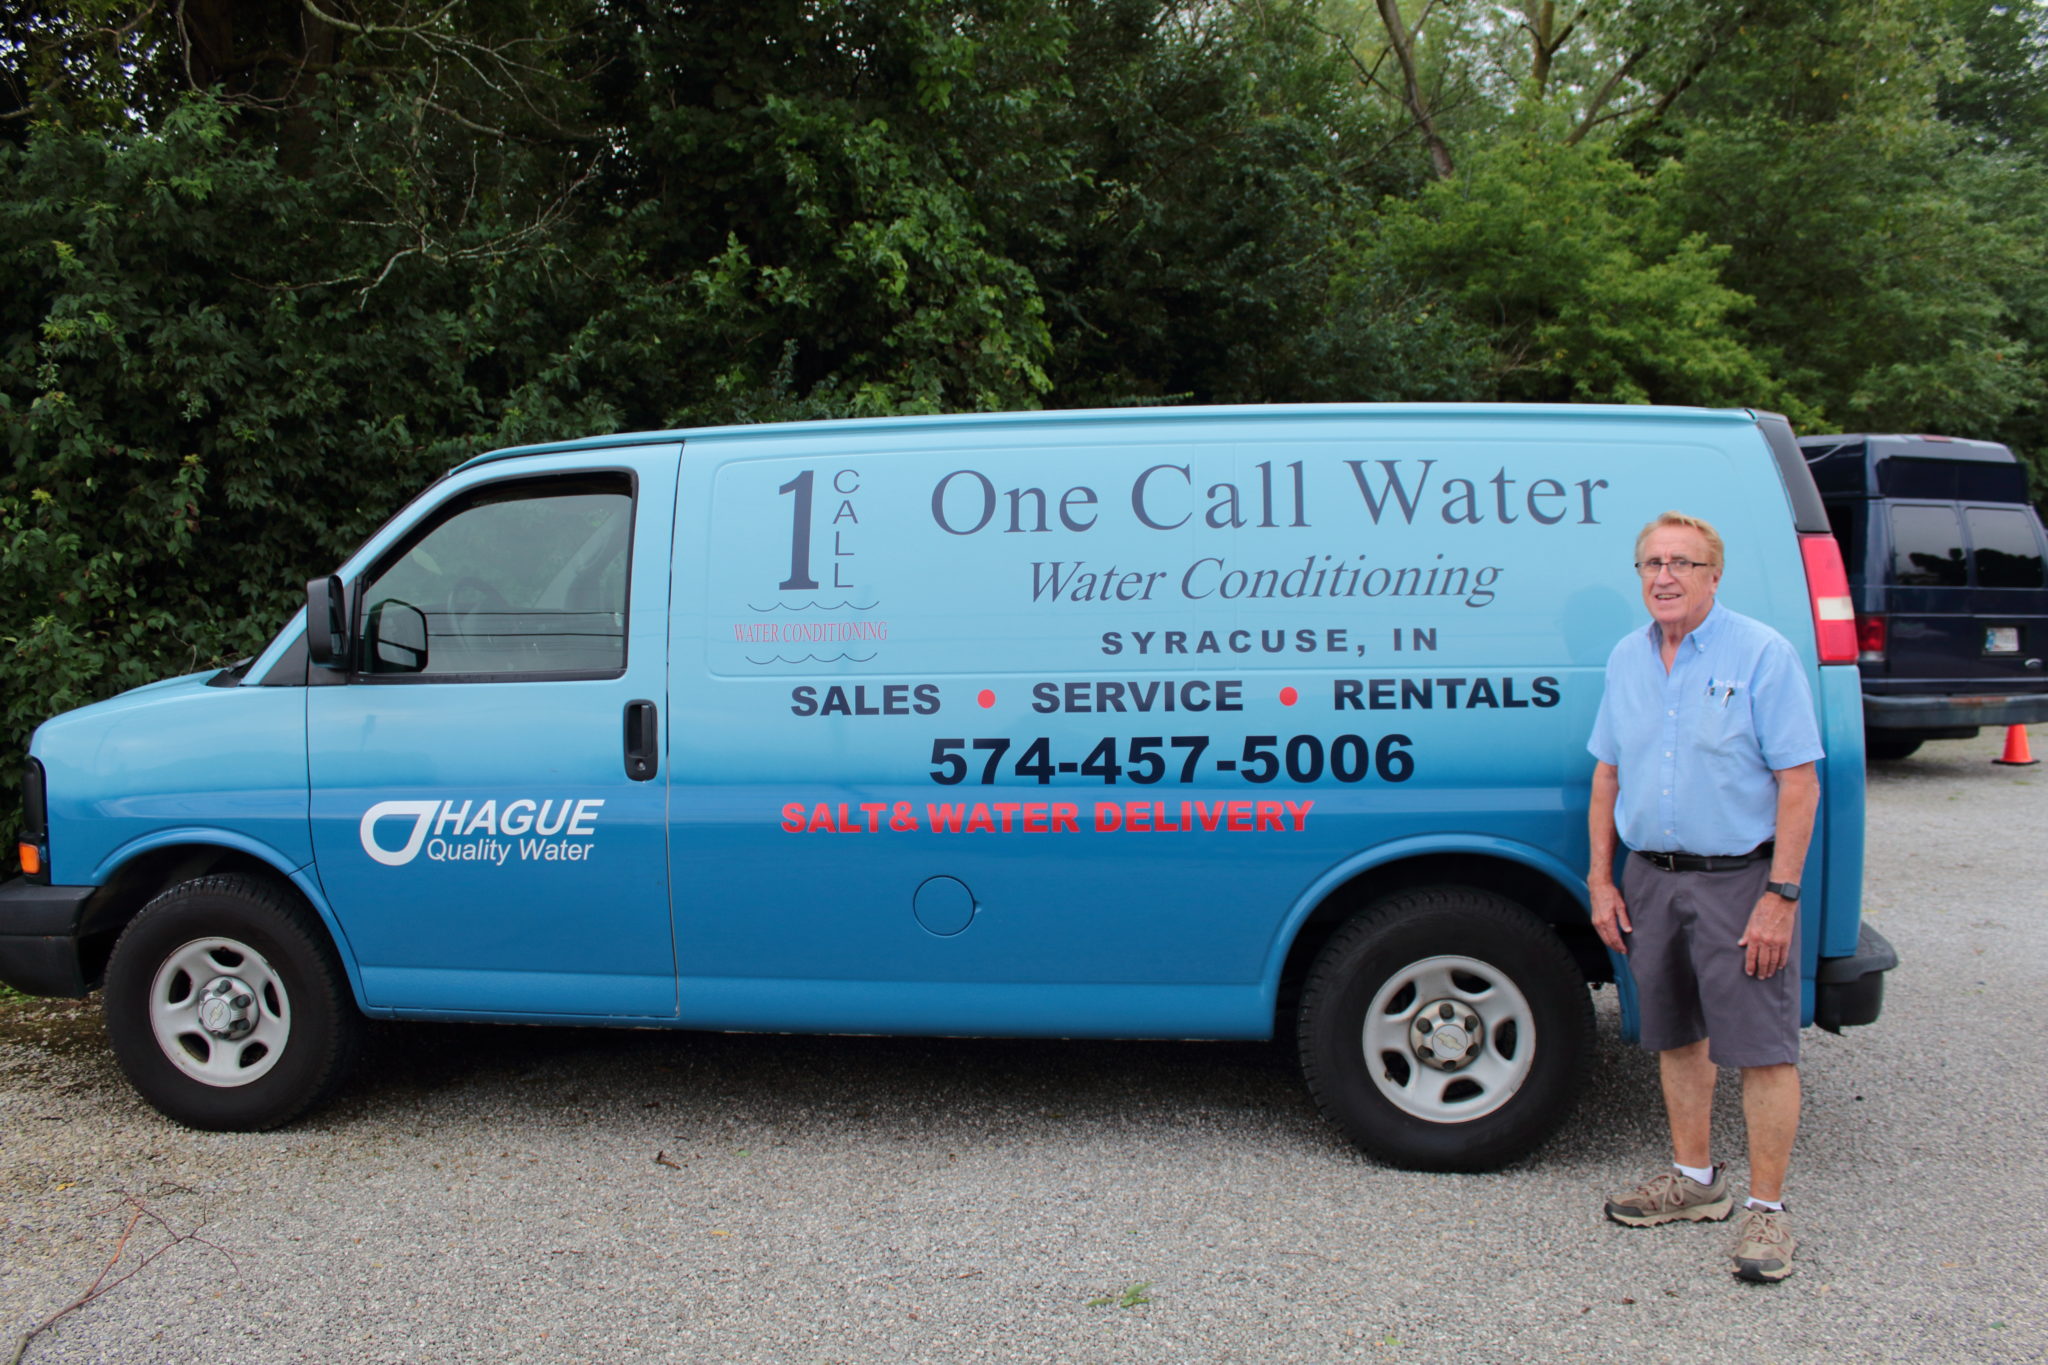 One Call Water